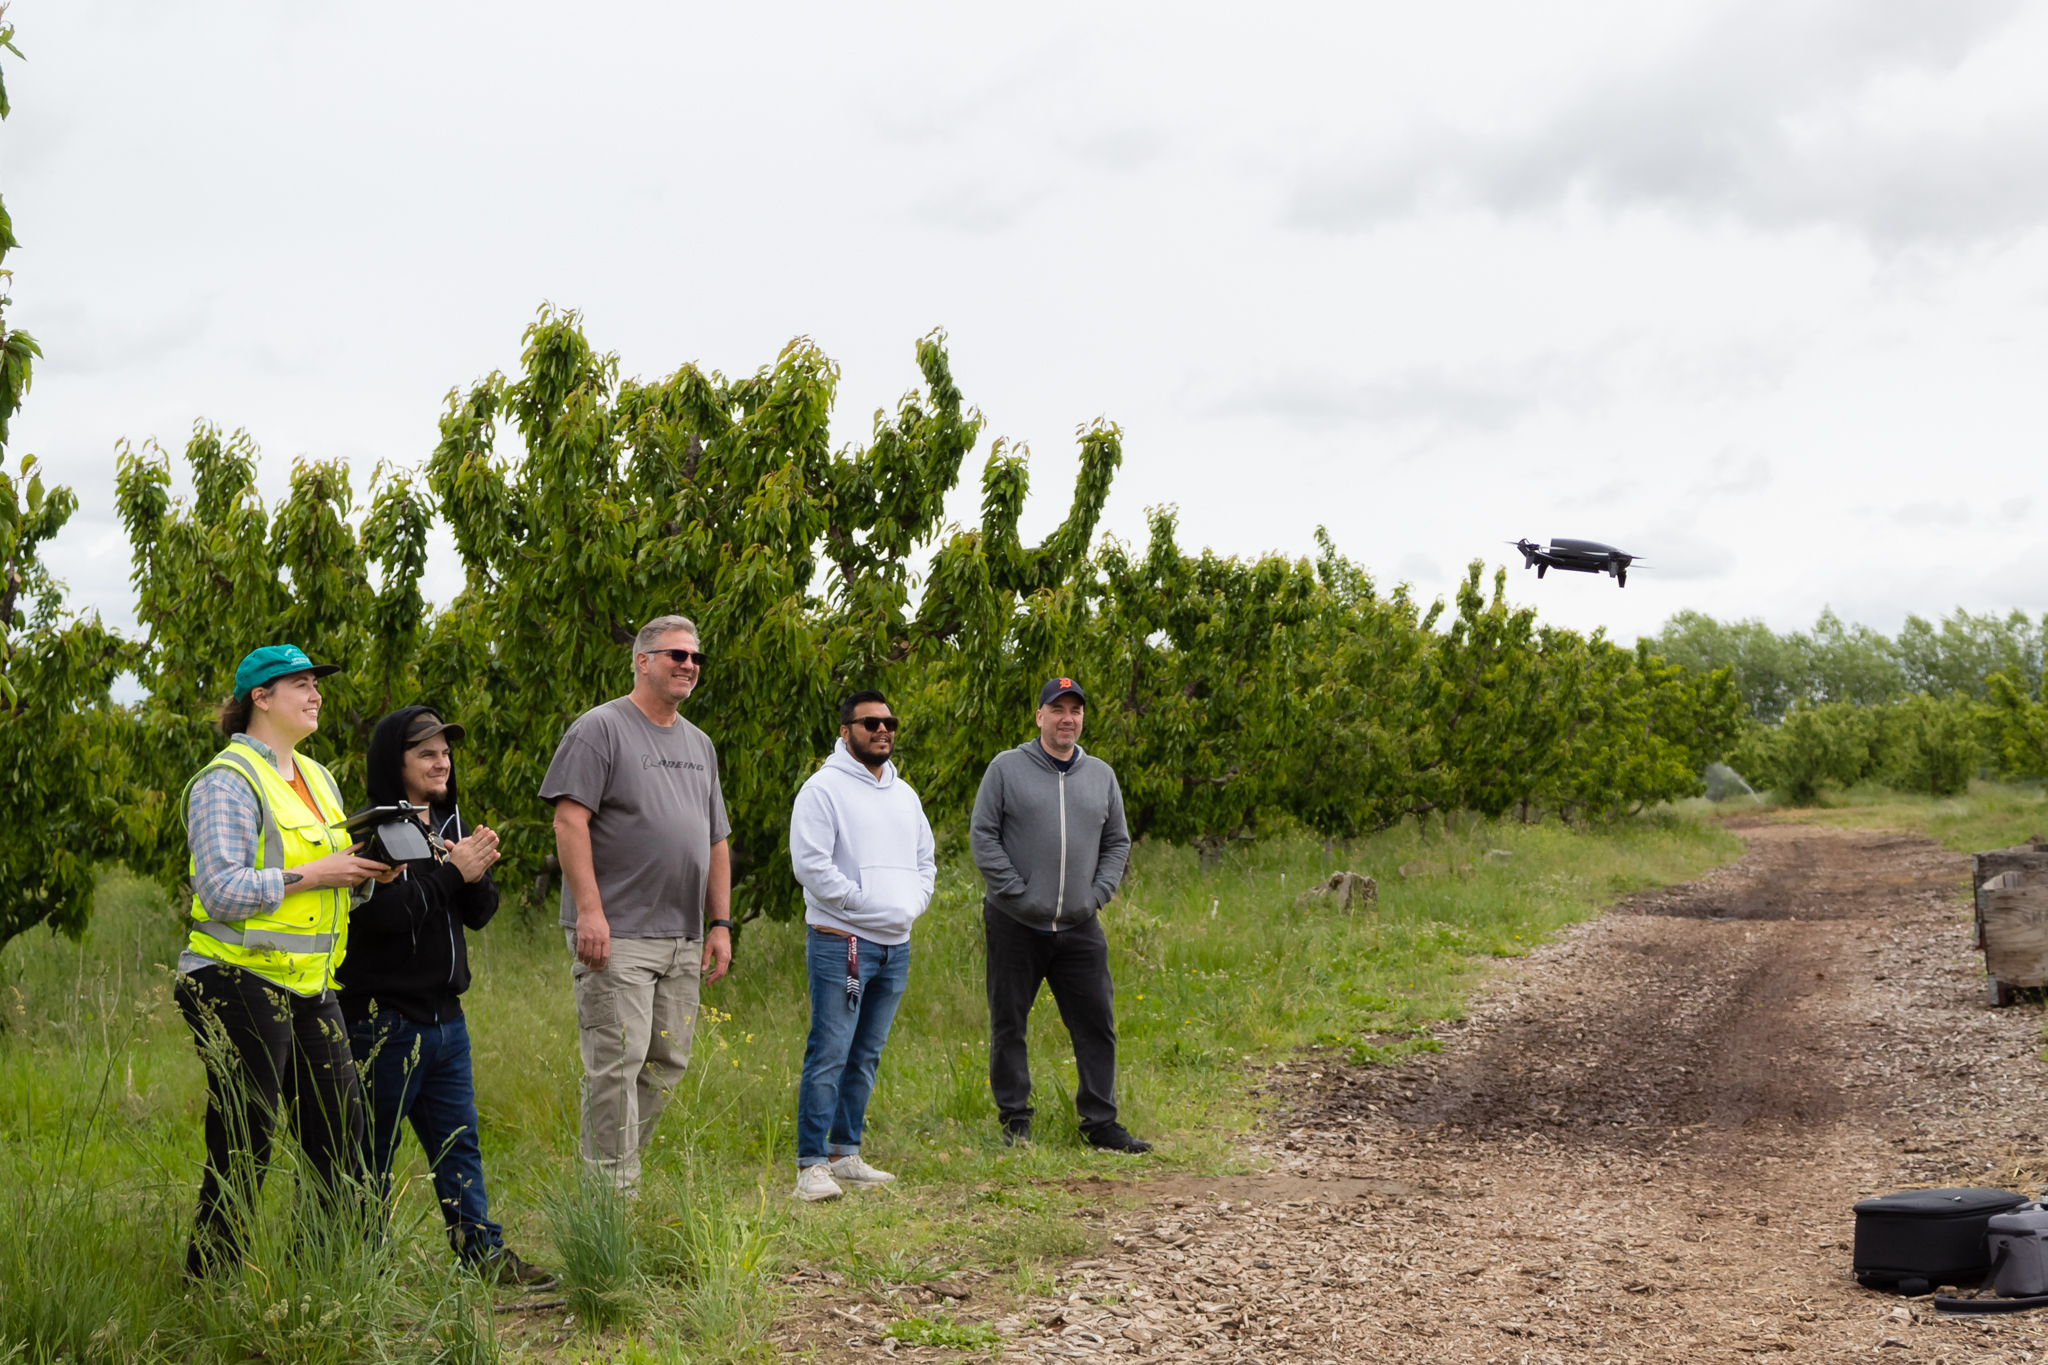 UAS instructor Kelsey Mach launches drone with students looking on